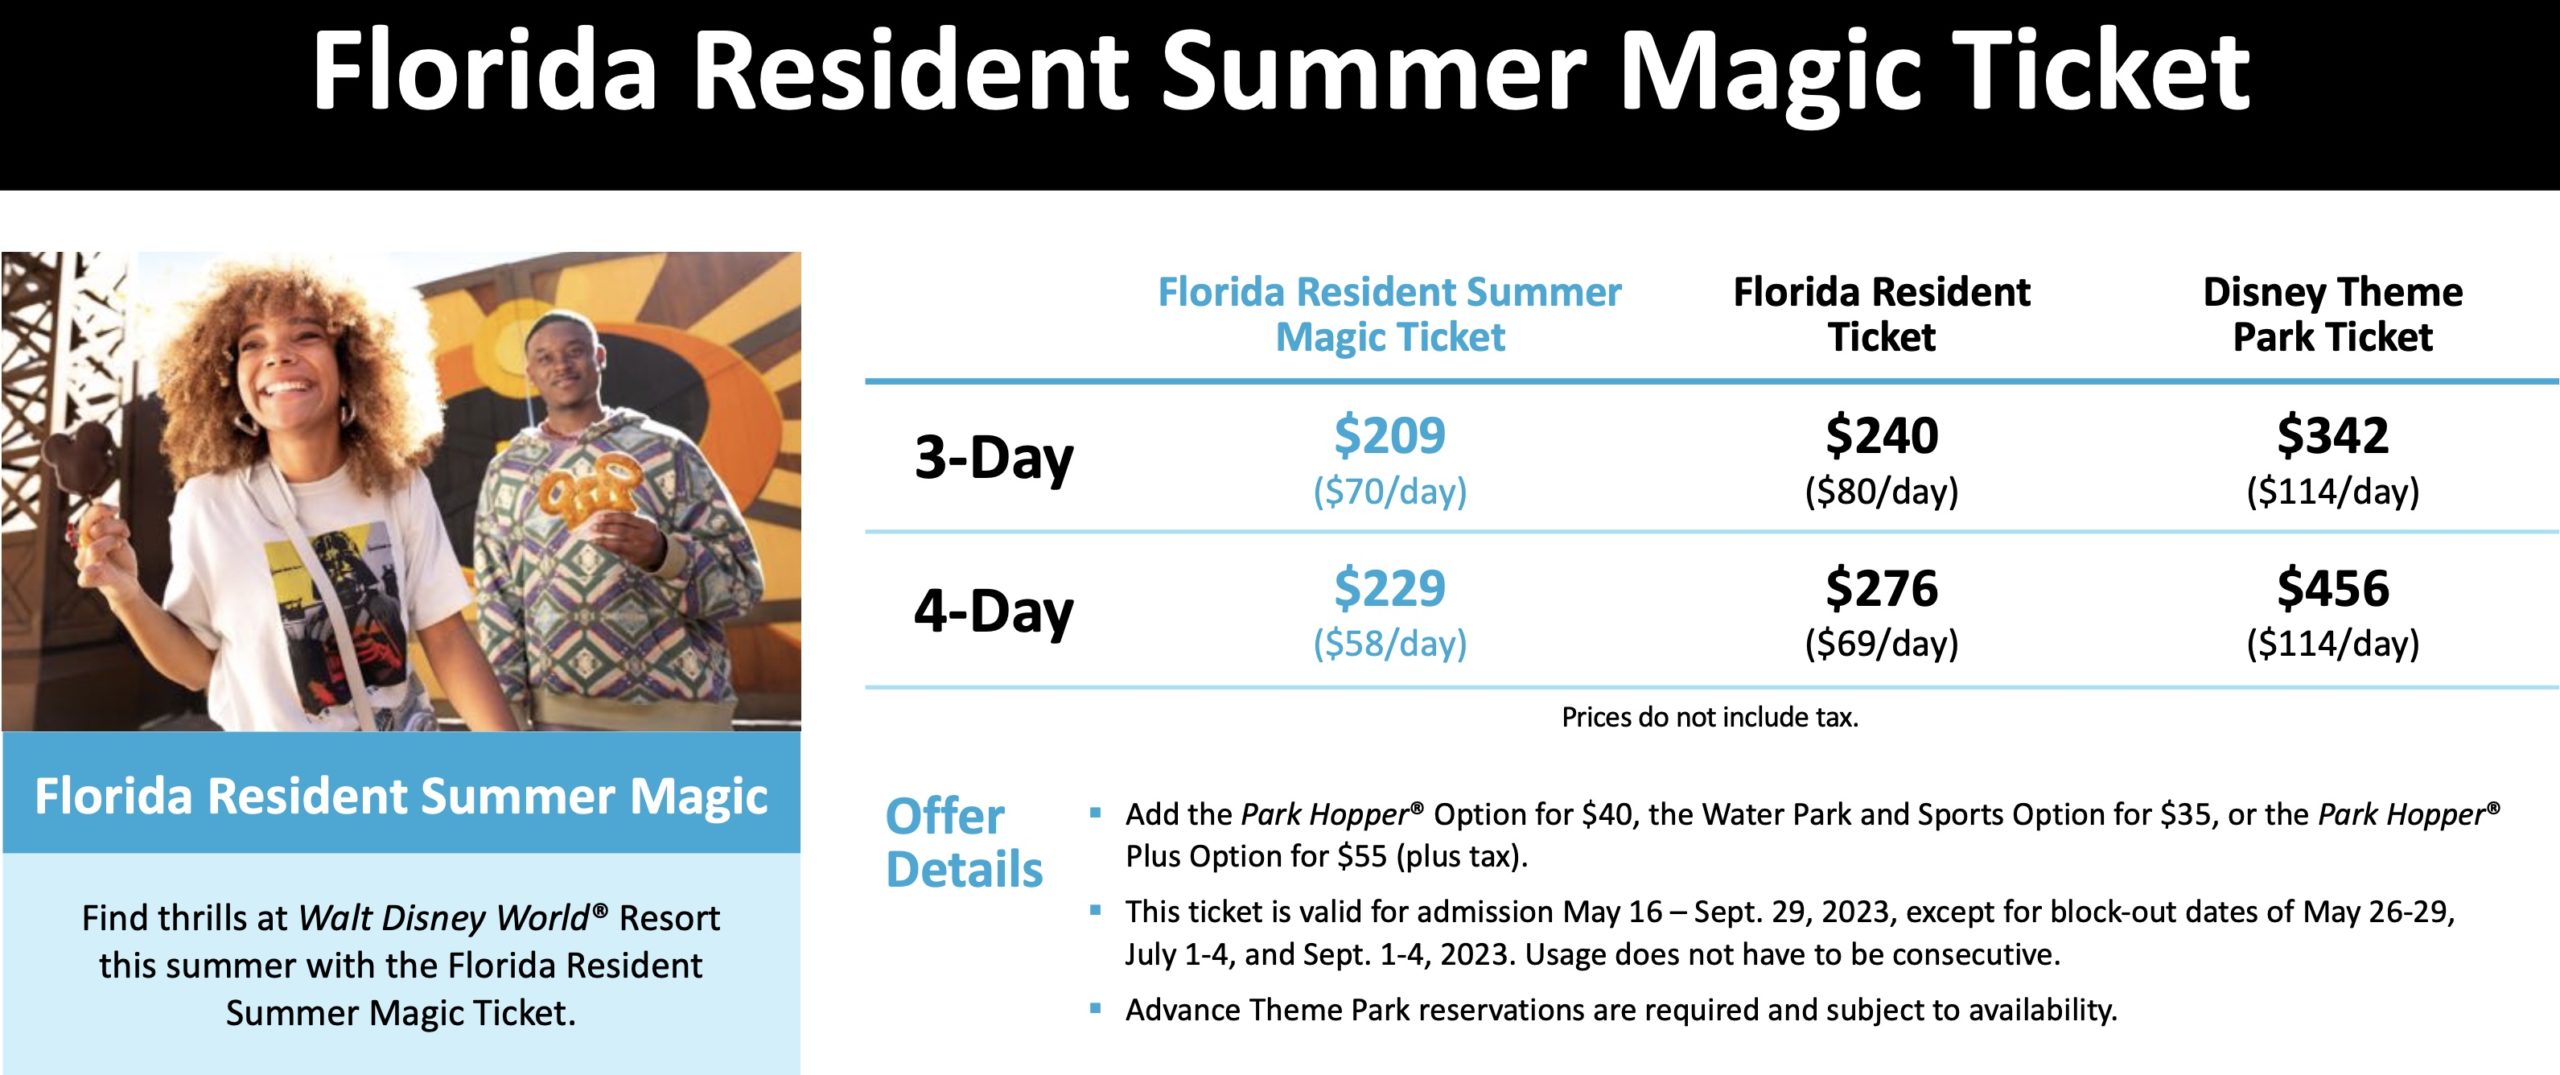 Why Is Tourism Down in Florida, and How Can Disney Fans Benefit